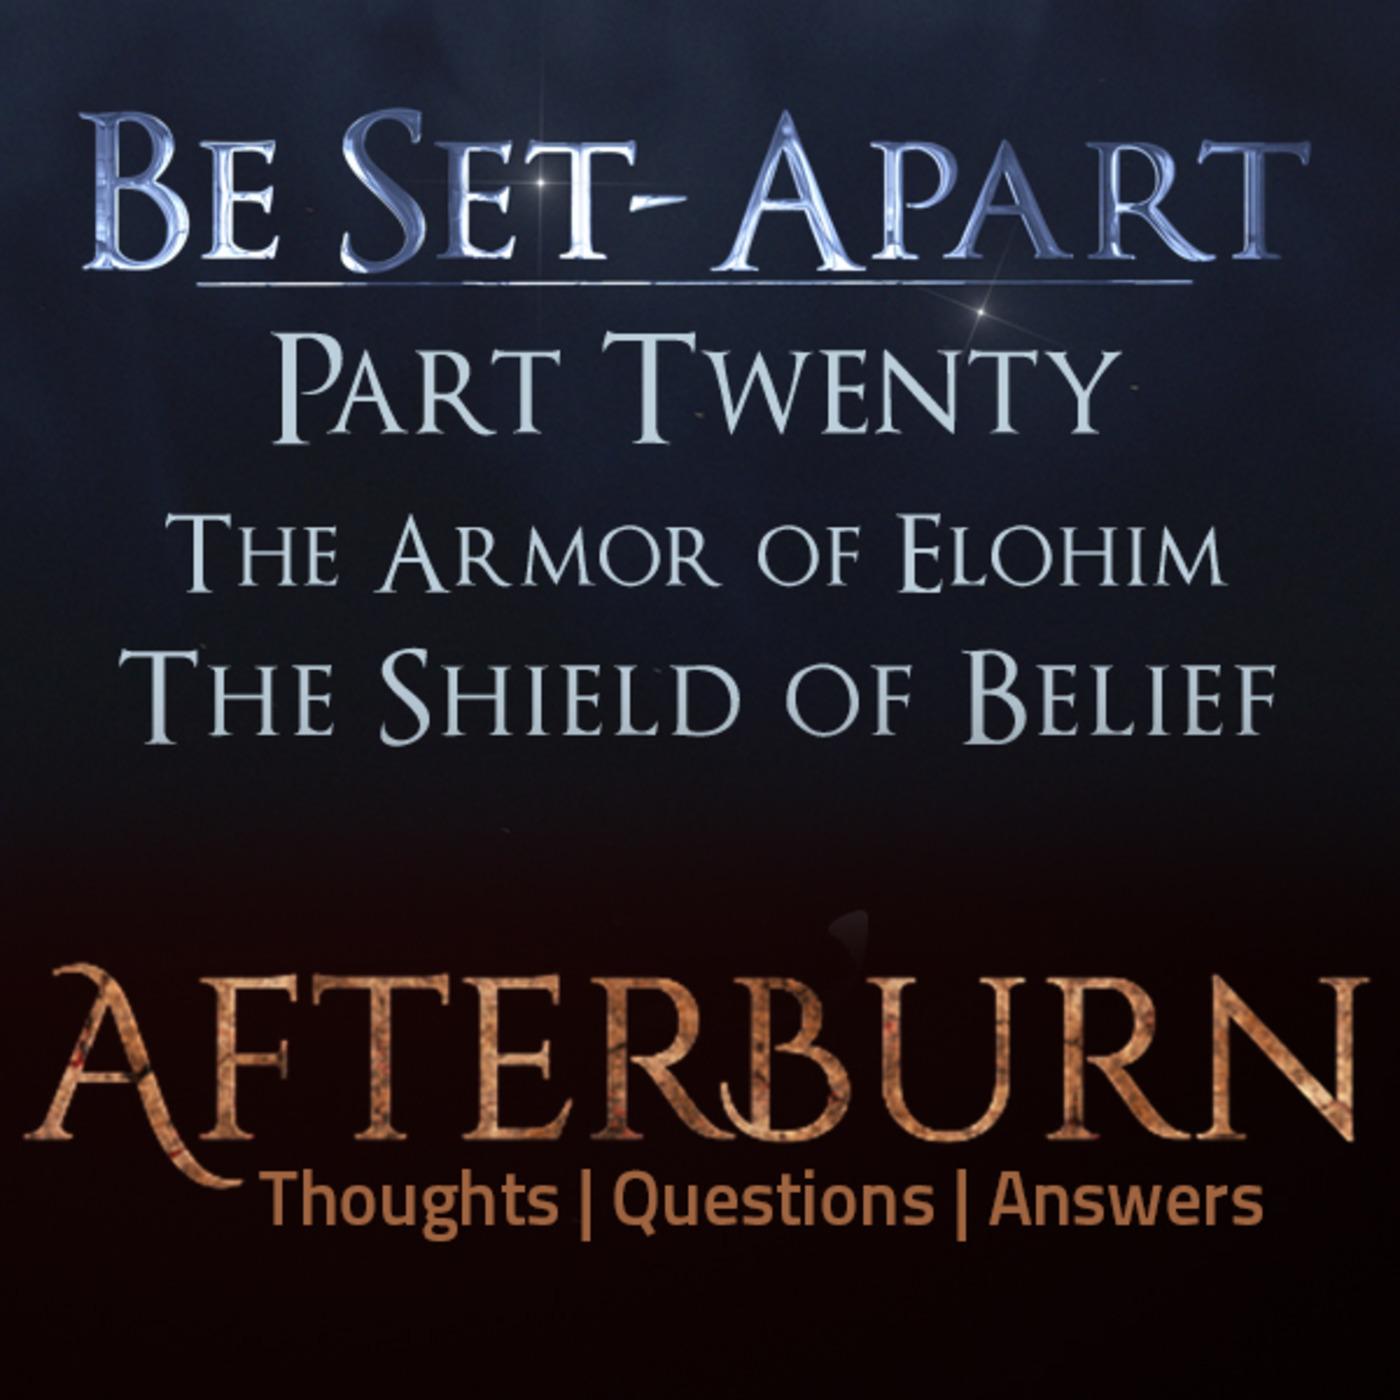 Episode 812: Afterburn | Be Set-Apart | Part Twenty | The Armor of Elohim | The Shield of Belief